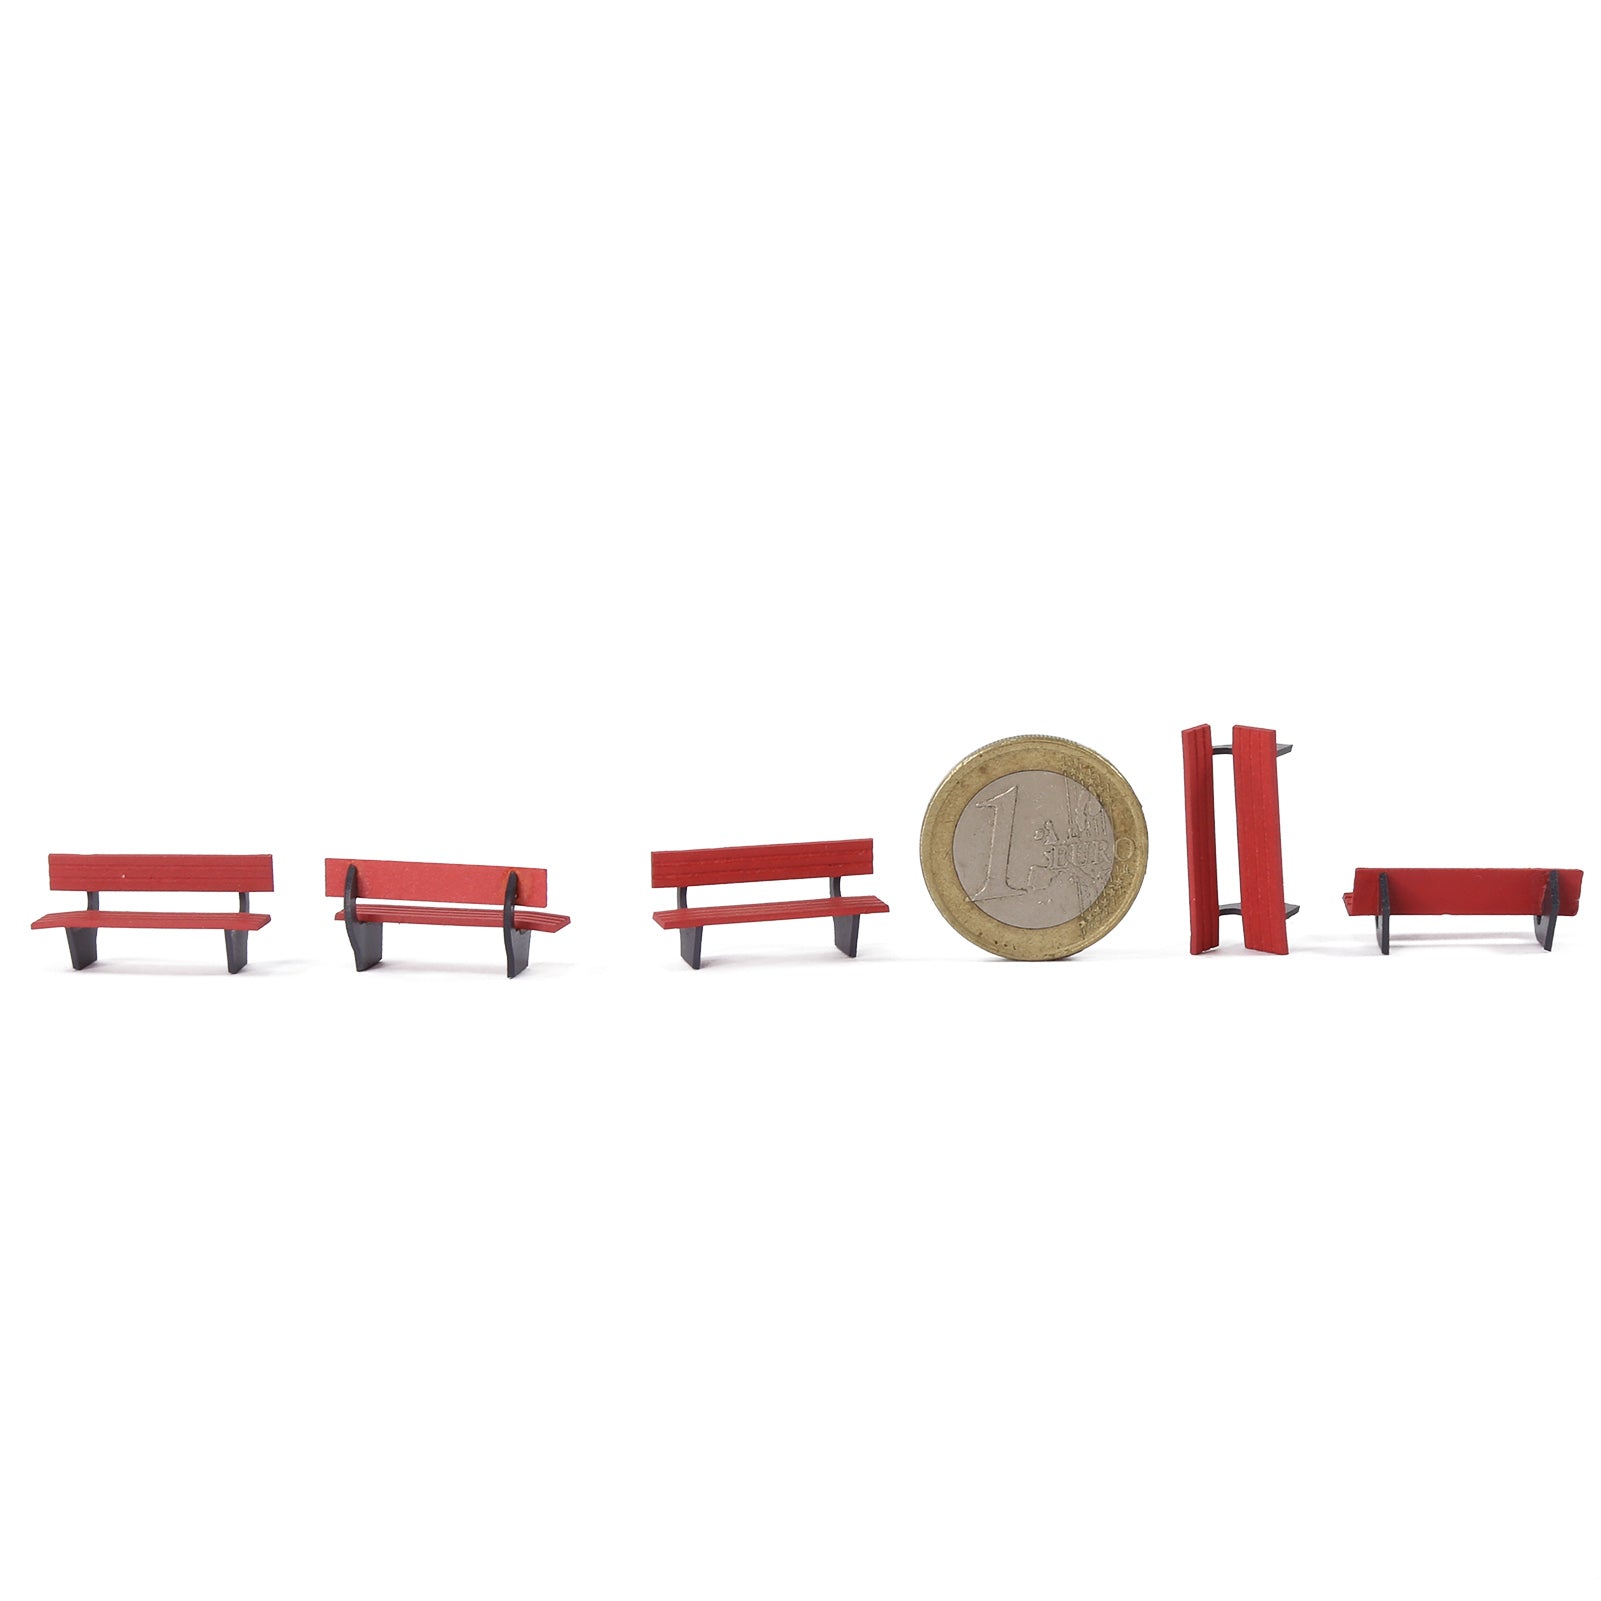 ZY39087 12pcs HO Scale 1:87 Garden Park Red Benches Street Seats Chairs